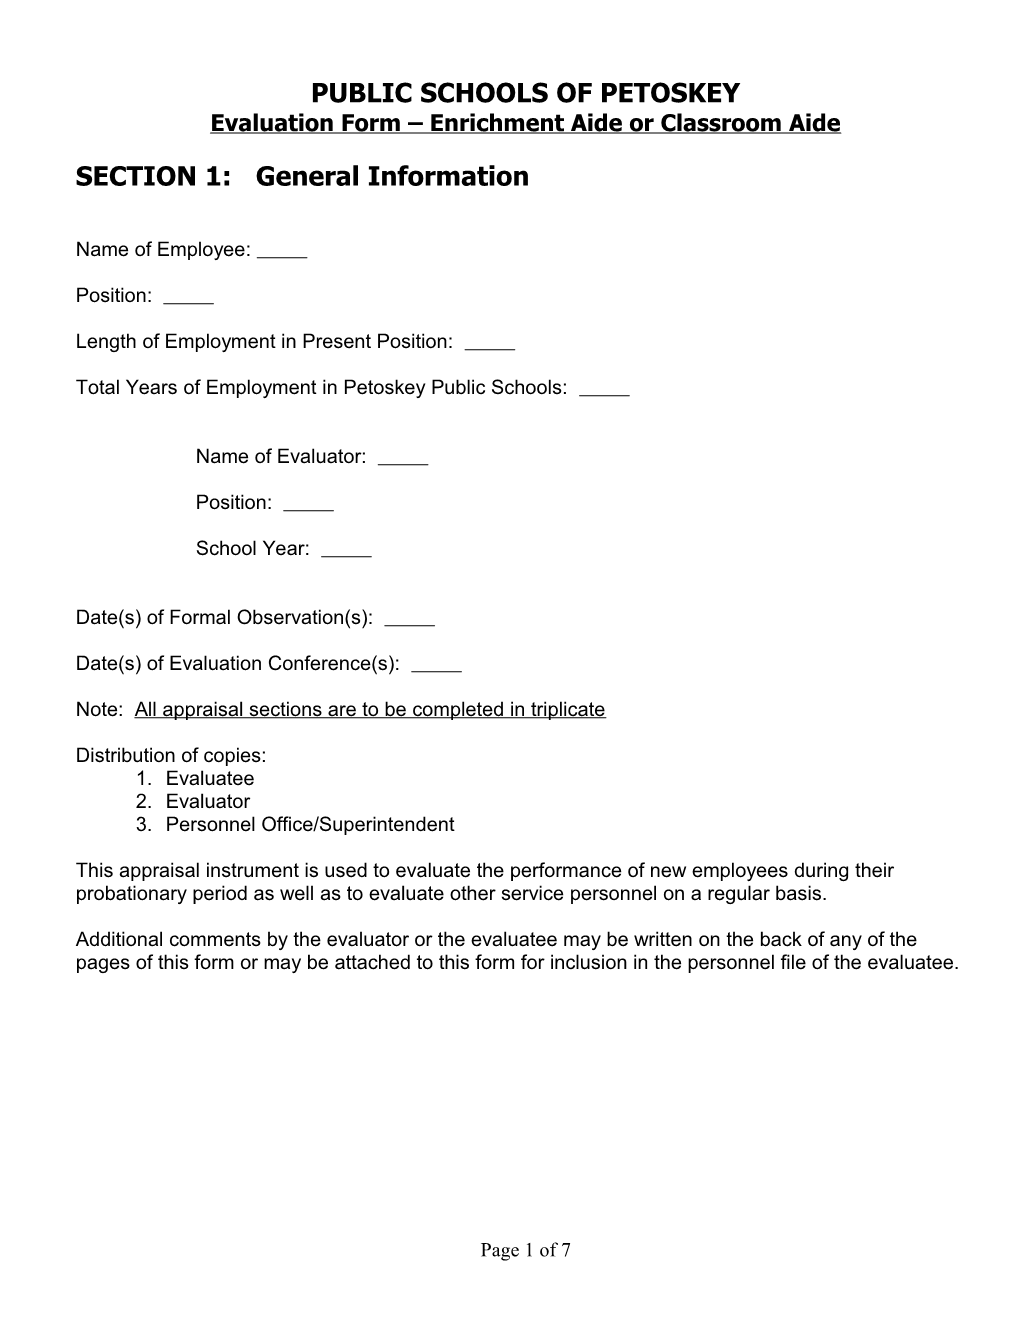 Evaluation Form Enrichment Aide Or Classroom Aide